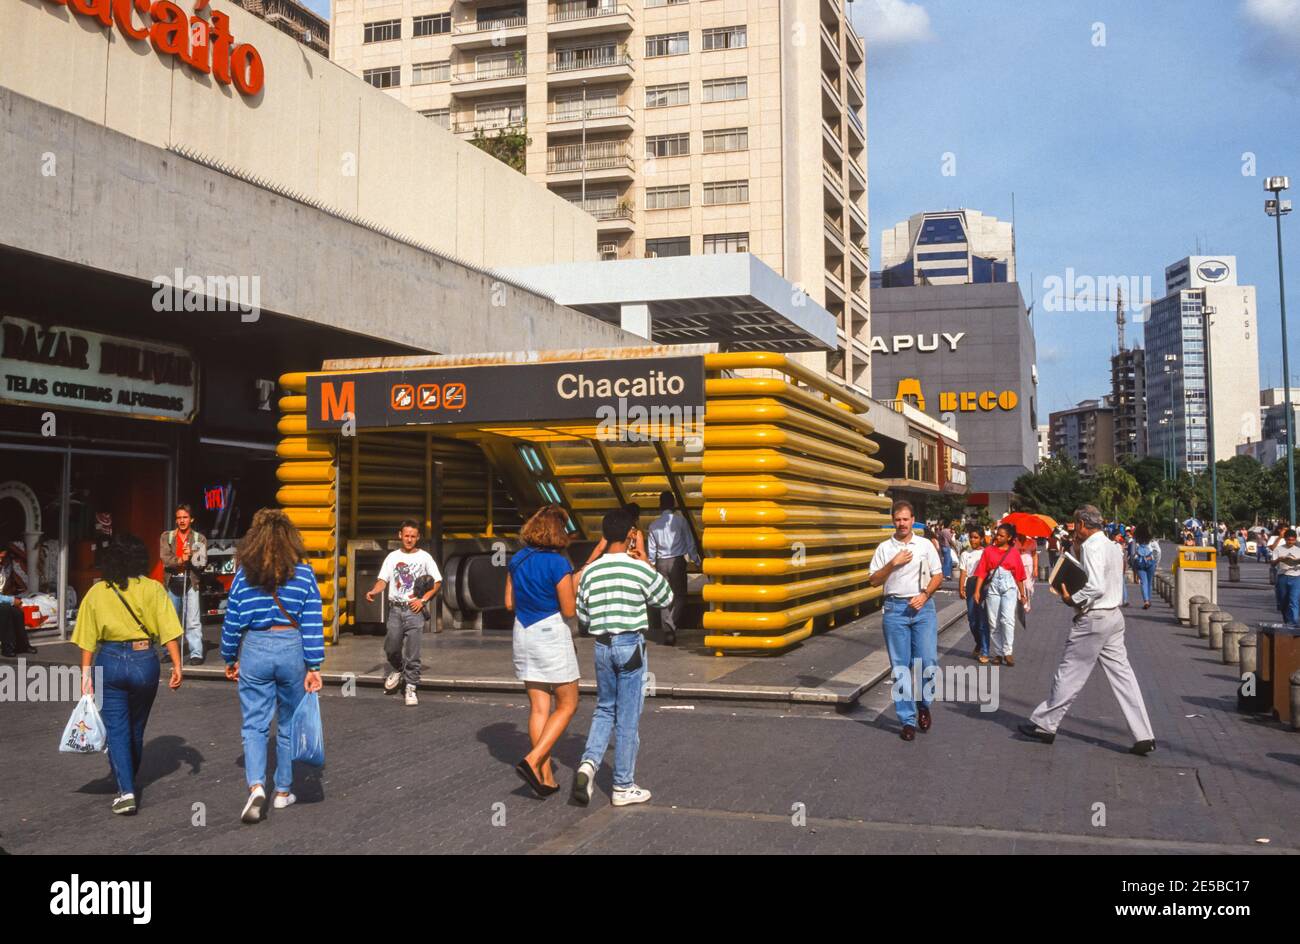 CARACAS, VENEZUELA, 1988 - Metro  entrance sign at Chacaito station, and people on sidewalk. Stock Photo